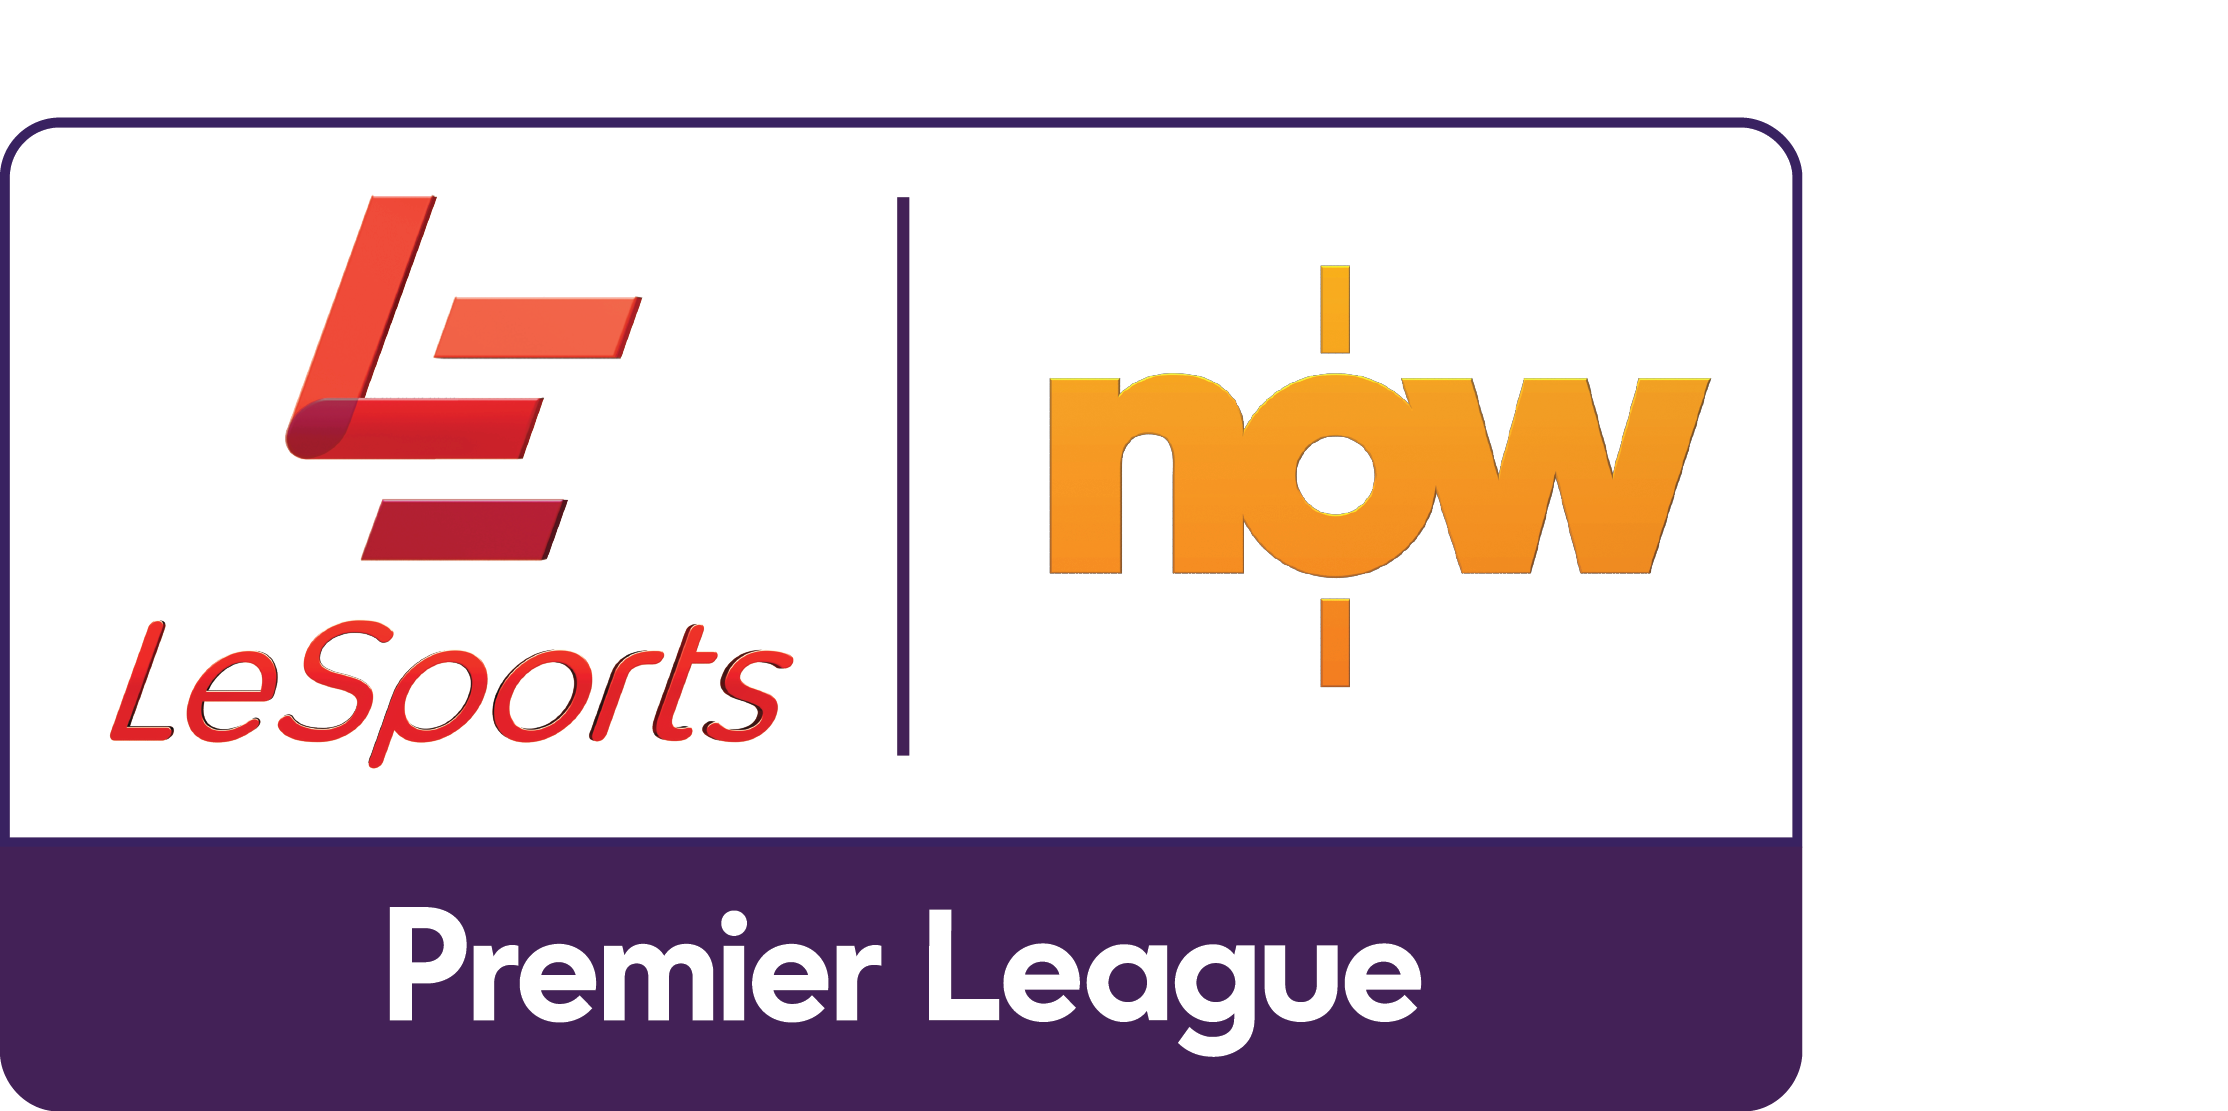 2016-19 Premier League will be delivered on LeSports HK and Now TV platforms2228 x 1111